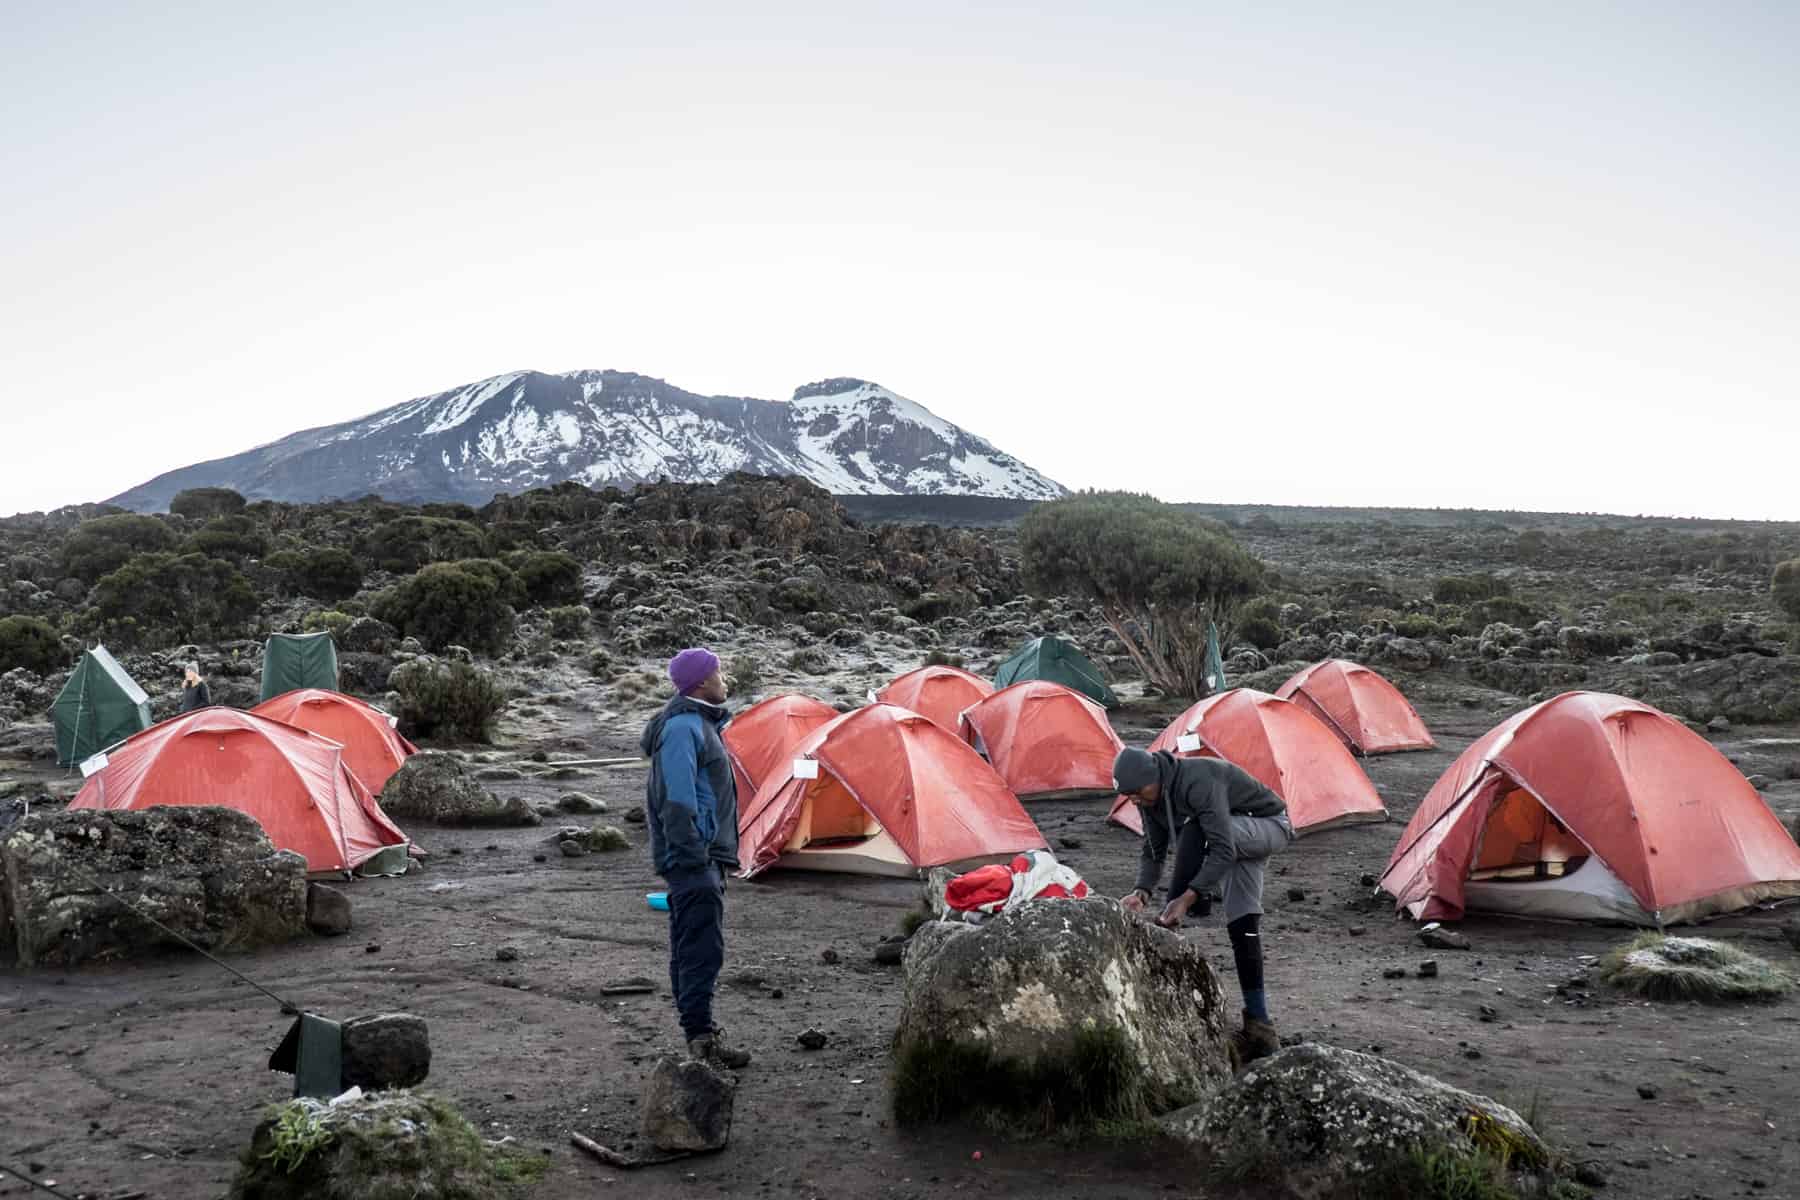 Orange tents set up in rocky landscape and small green bushes at the Kilimanjaro Shira 2 Camp